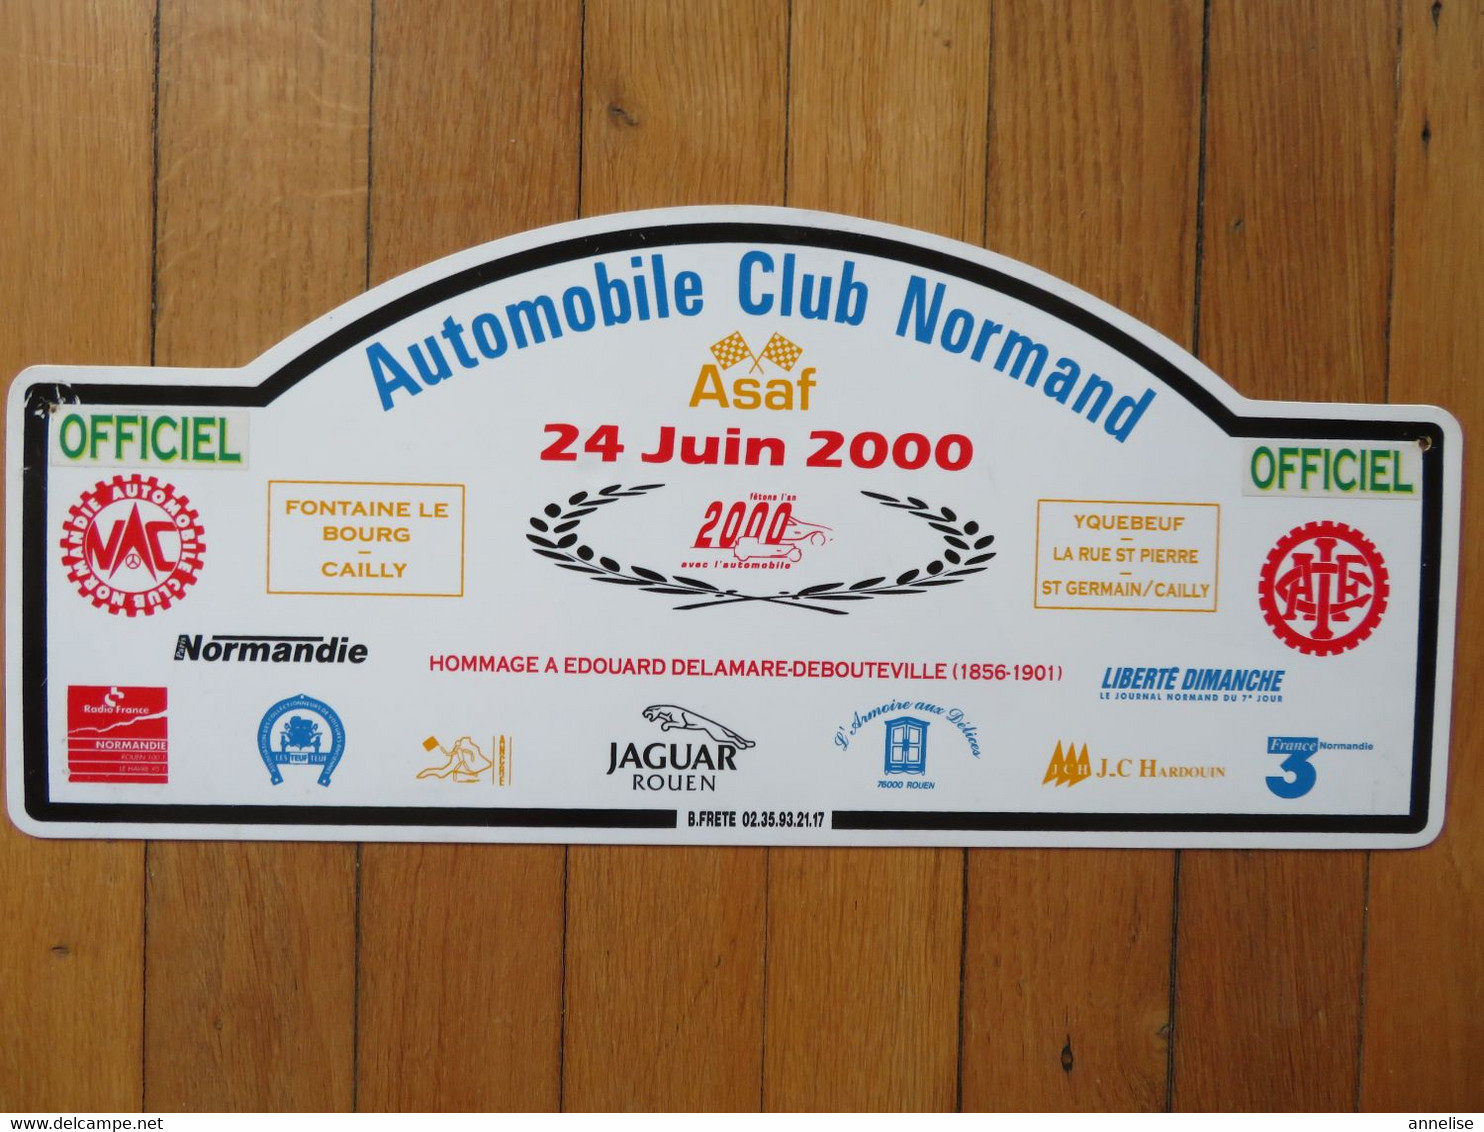 Plaque De Rallye Automobile 24 Juin 2000 "Officiel" Automobile Club Normand 76 Cailly Fontaine Bourg Yquebeuf St Germain - Rallye (Rally) Plates